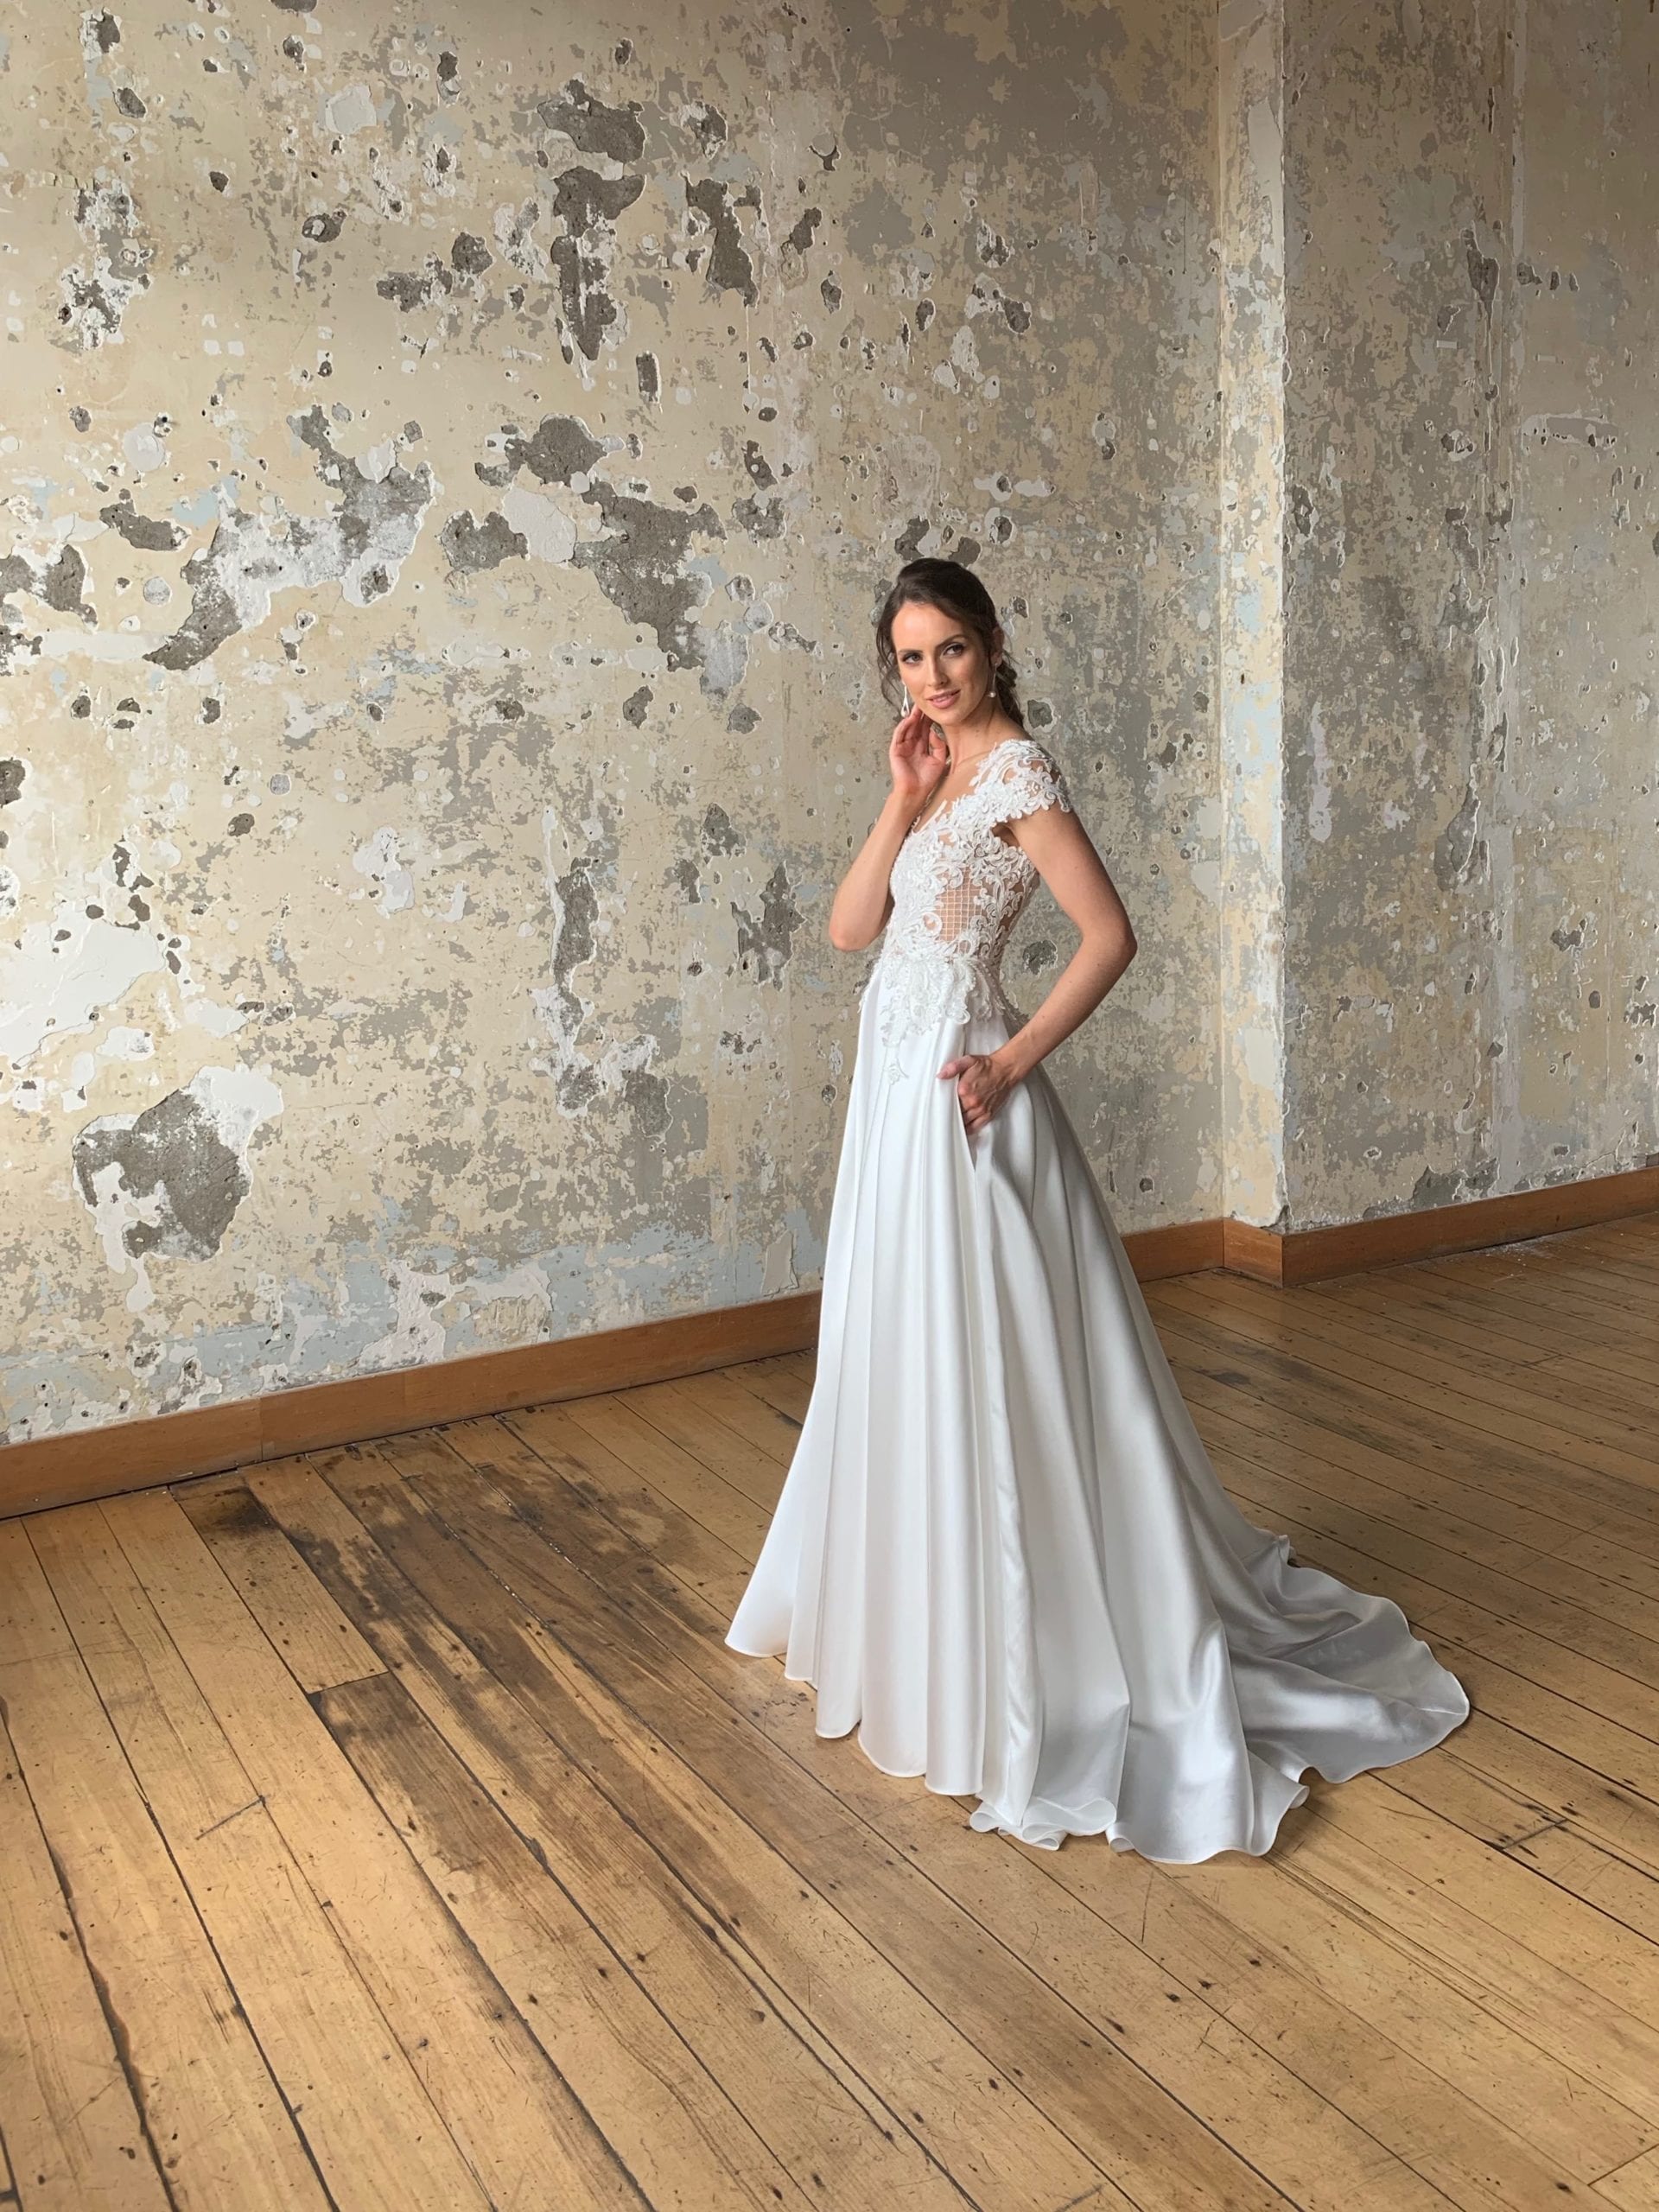 Female model wearing Vinka Design Modern Muse Wedding Dress. In chic warehouse the front detail of a gown with a sheer high neckline, low back edged with lace and a skirt with pockets.